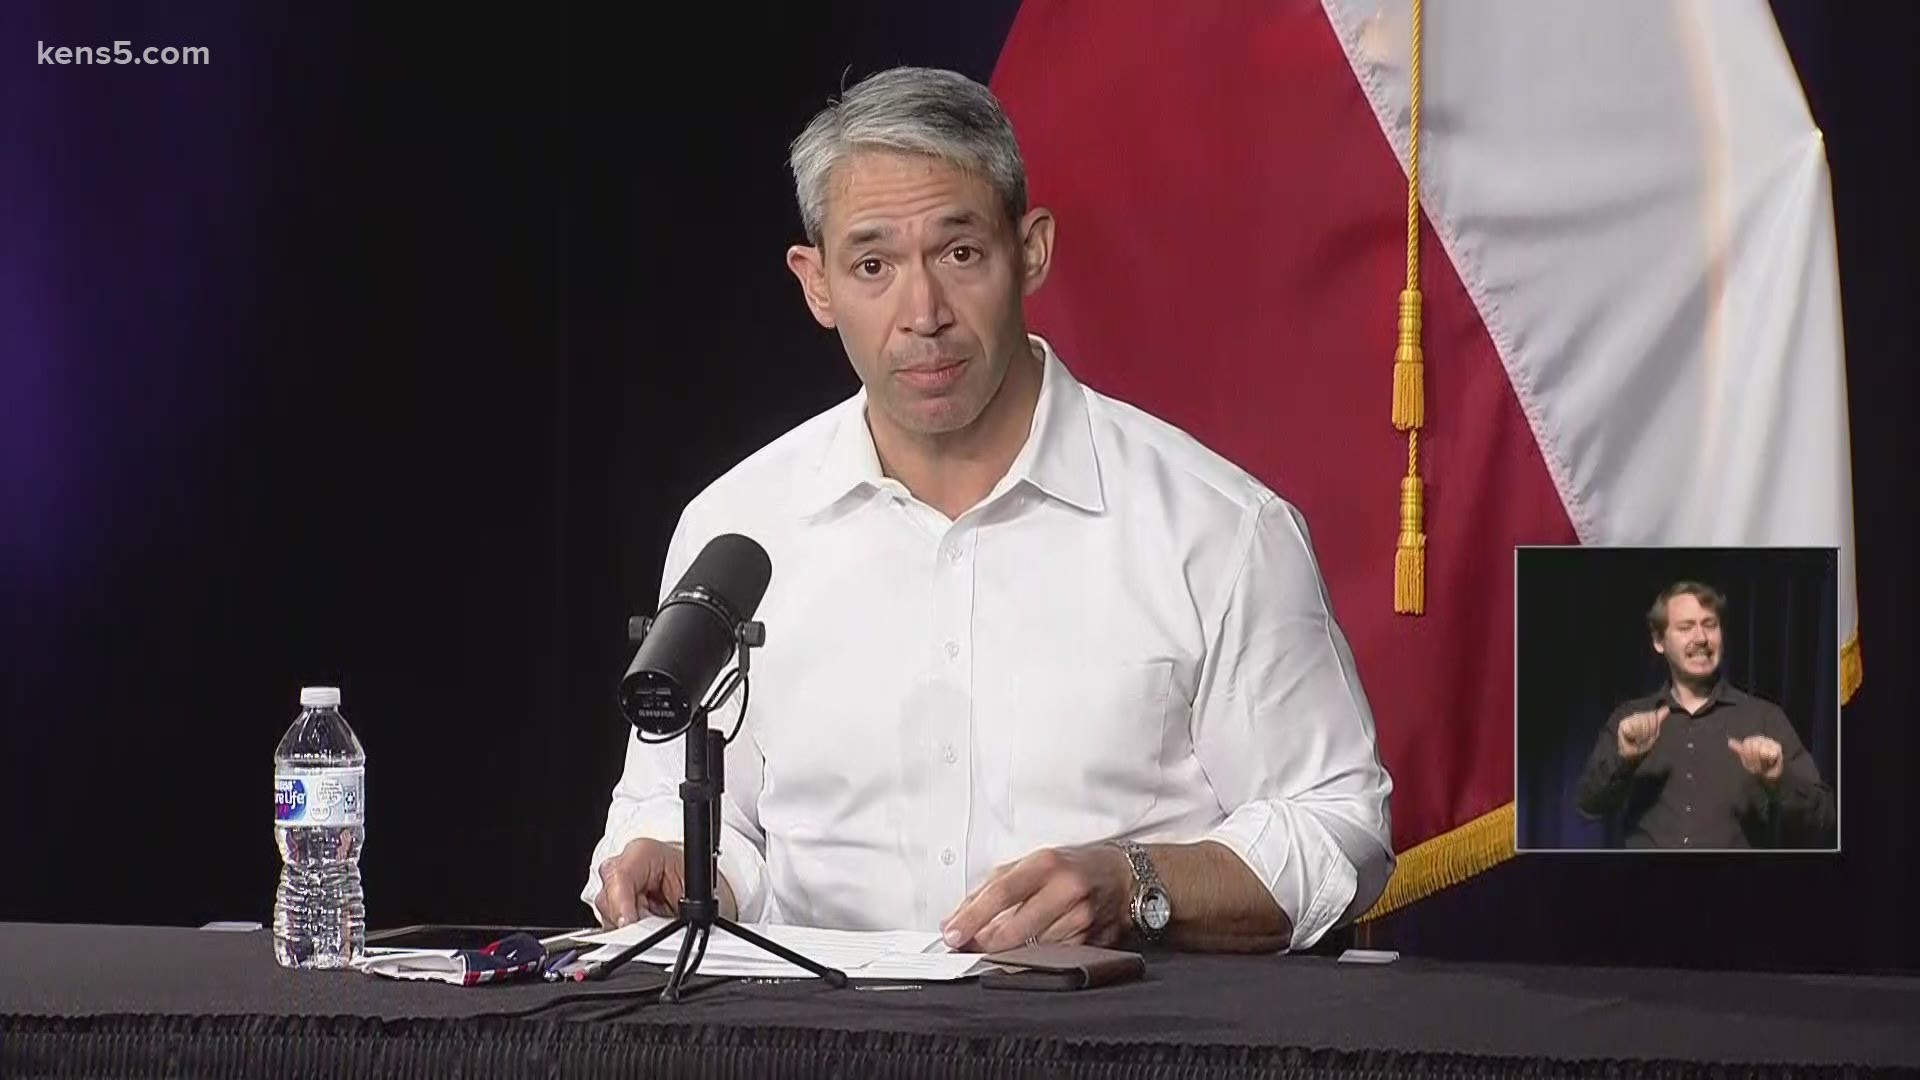 Mayor Nirenberg reported 1,210 new cases, bringing the total to 88,196. No new deaths were reported, so the county's death toll remains at 1,397.